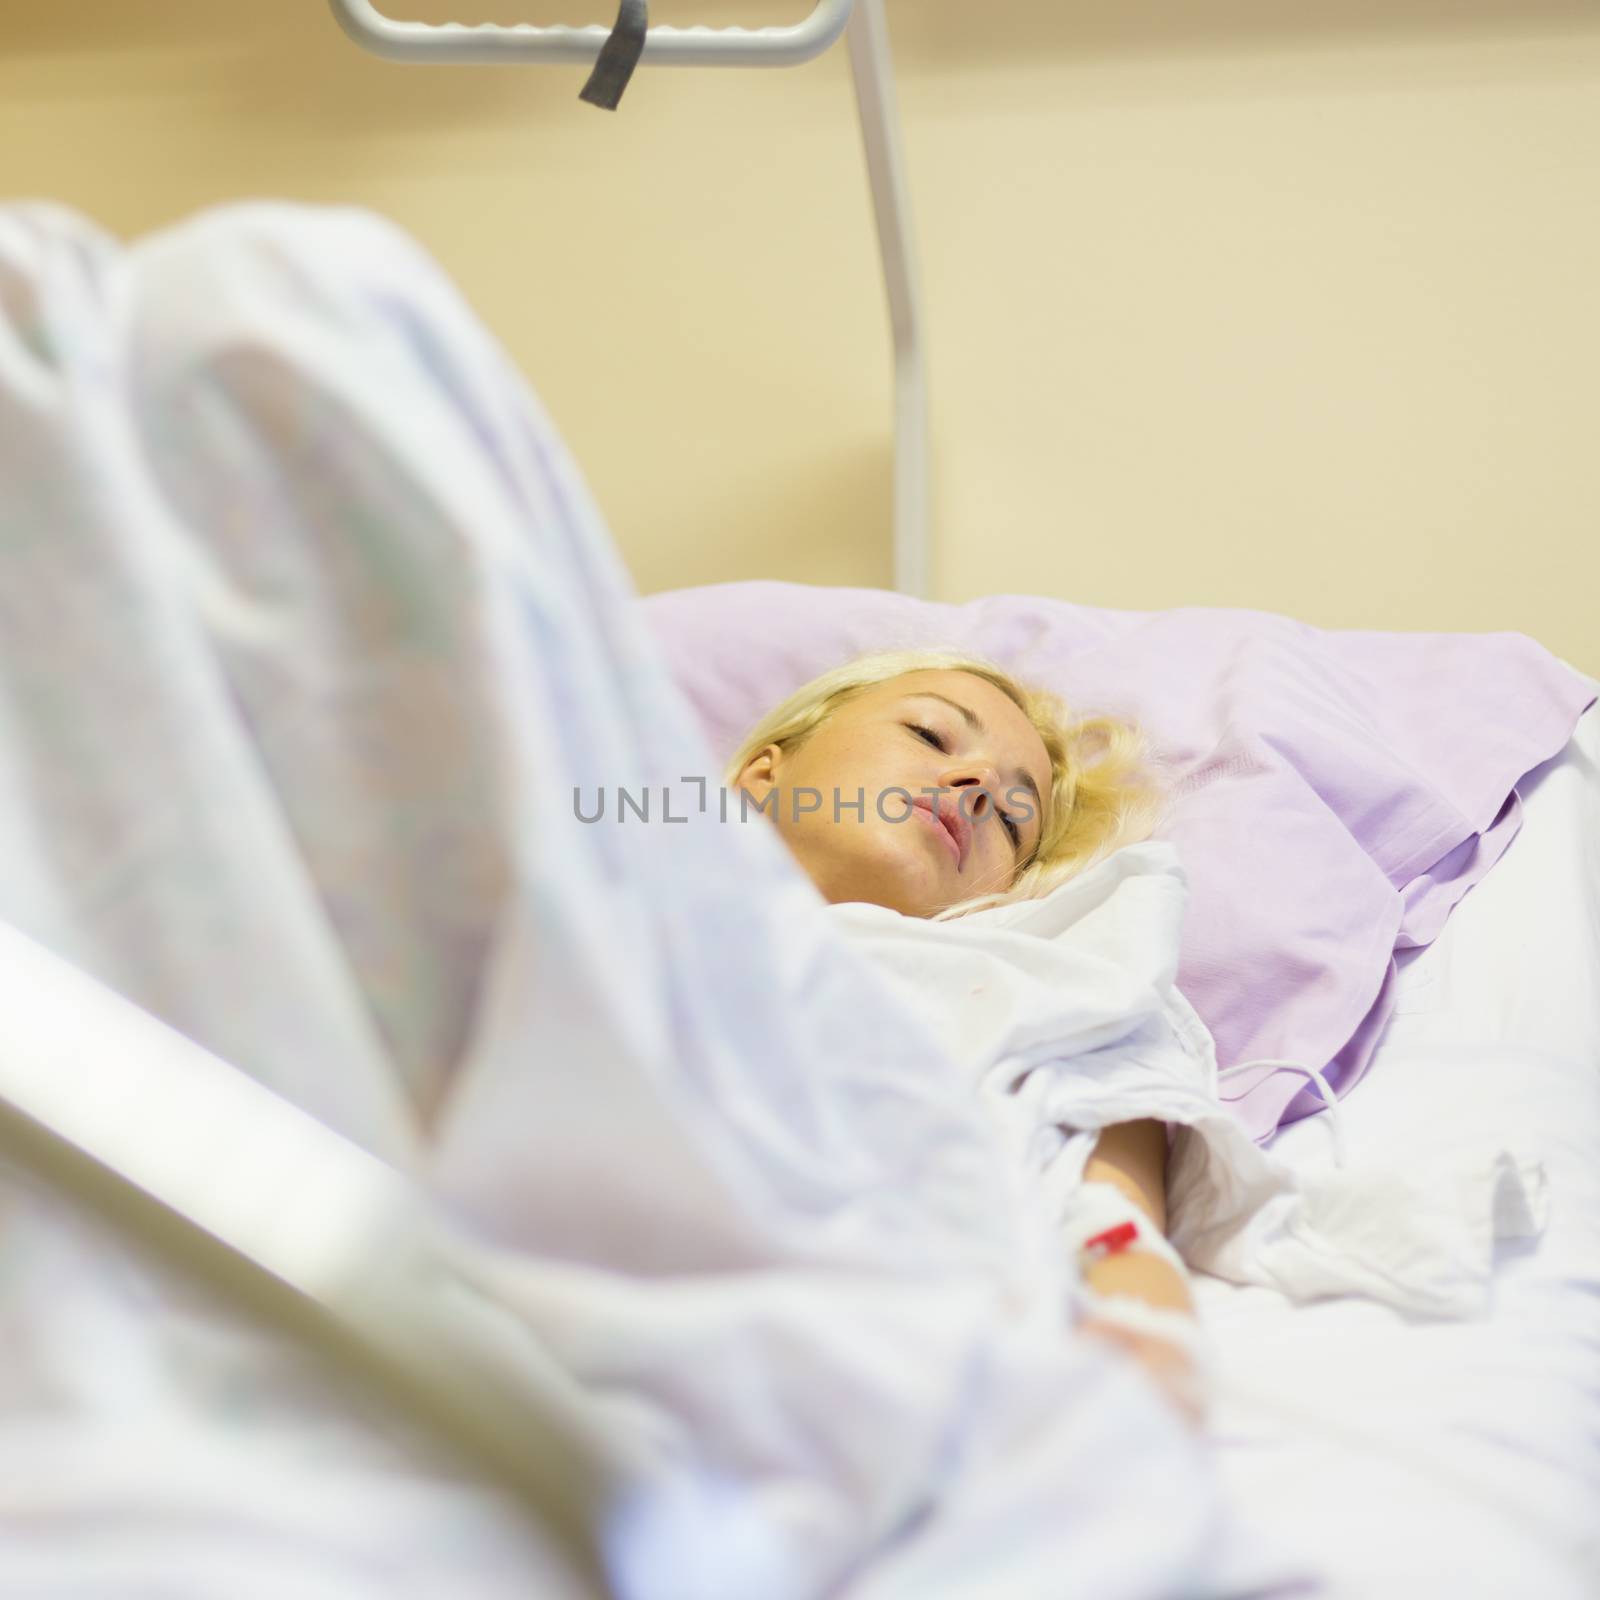 Bedridden female patient recovering after surgery in hospital care. by kasto